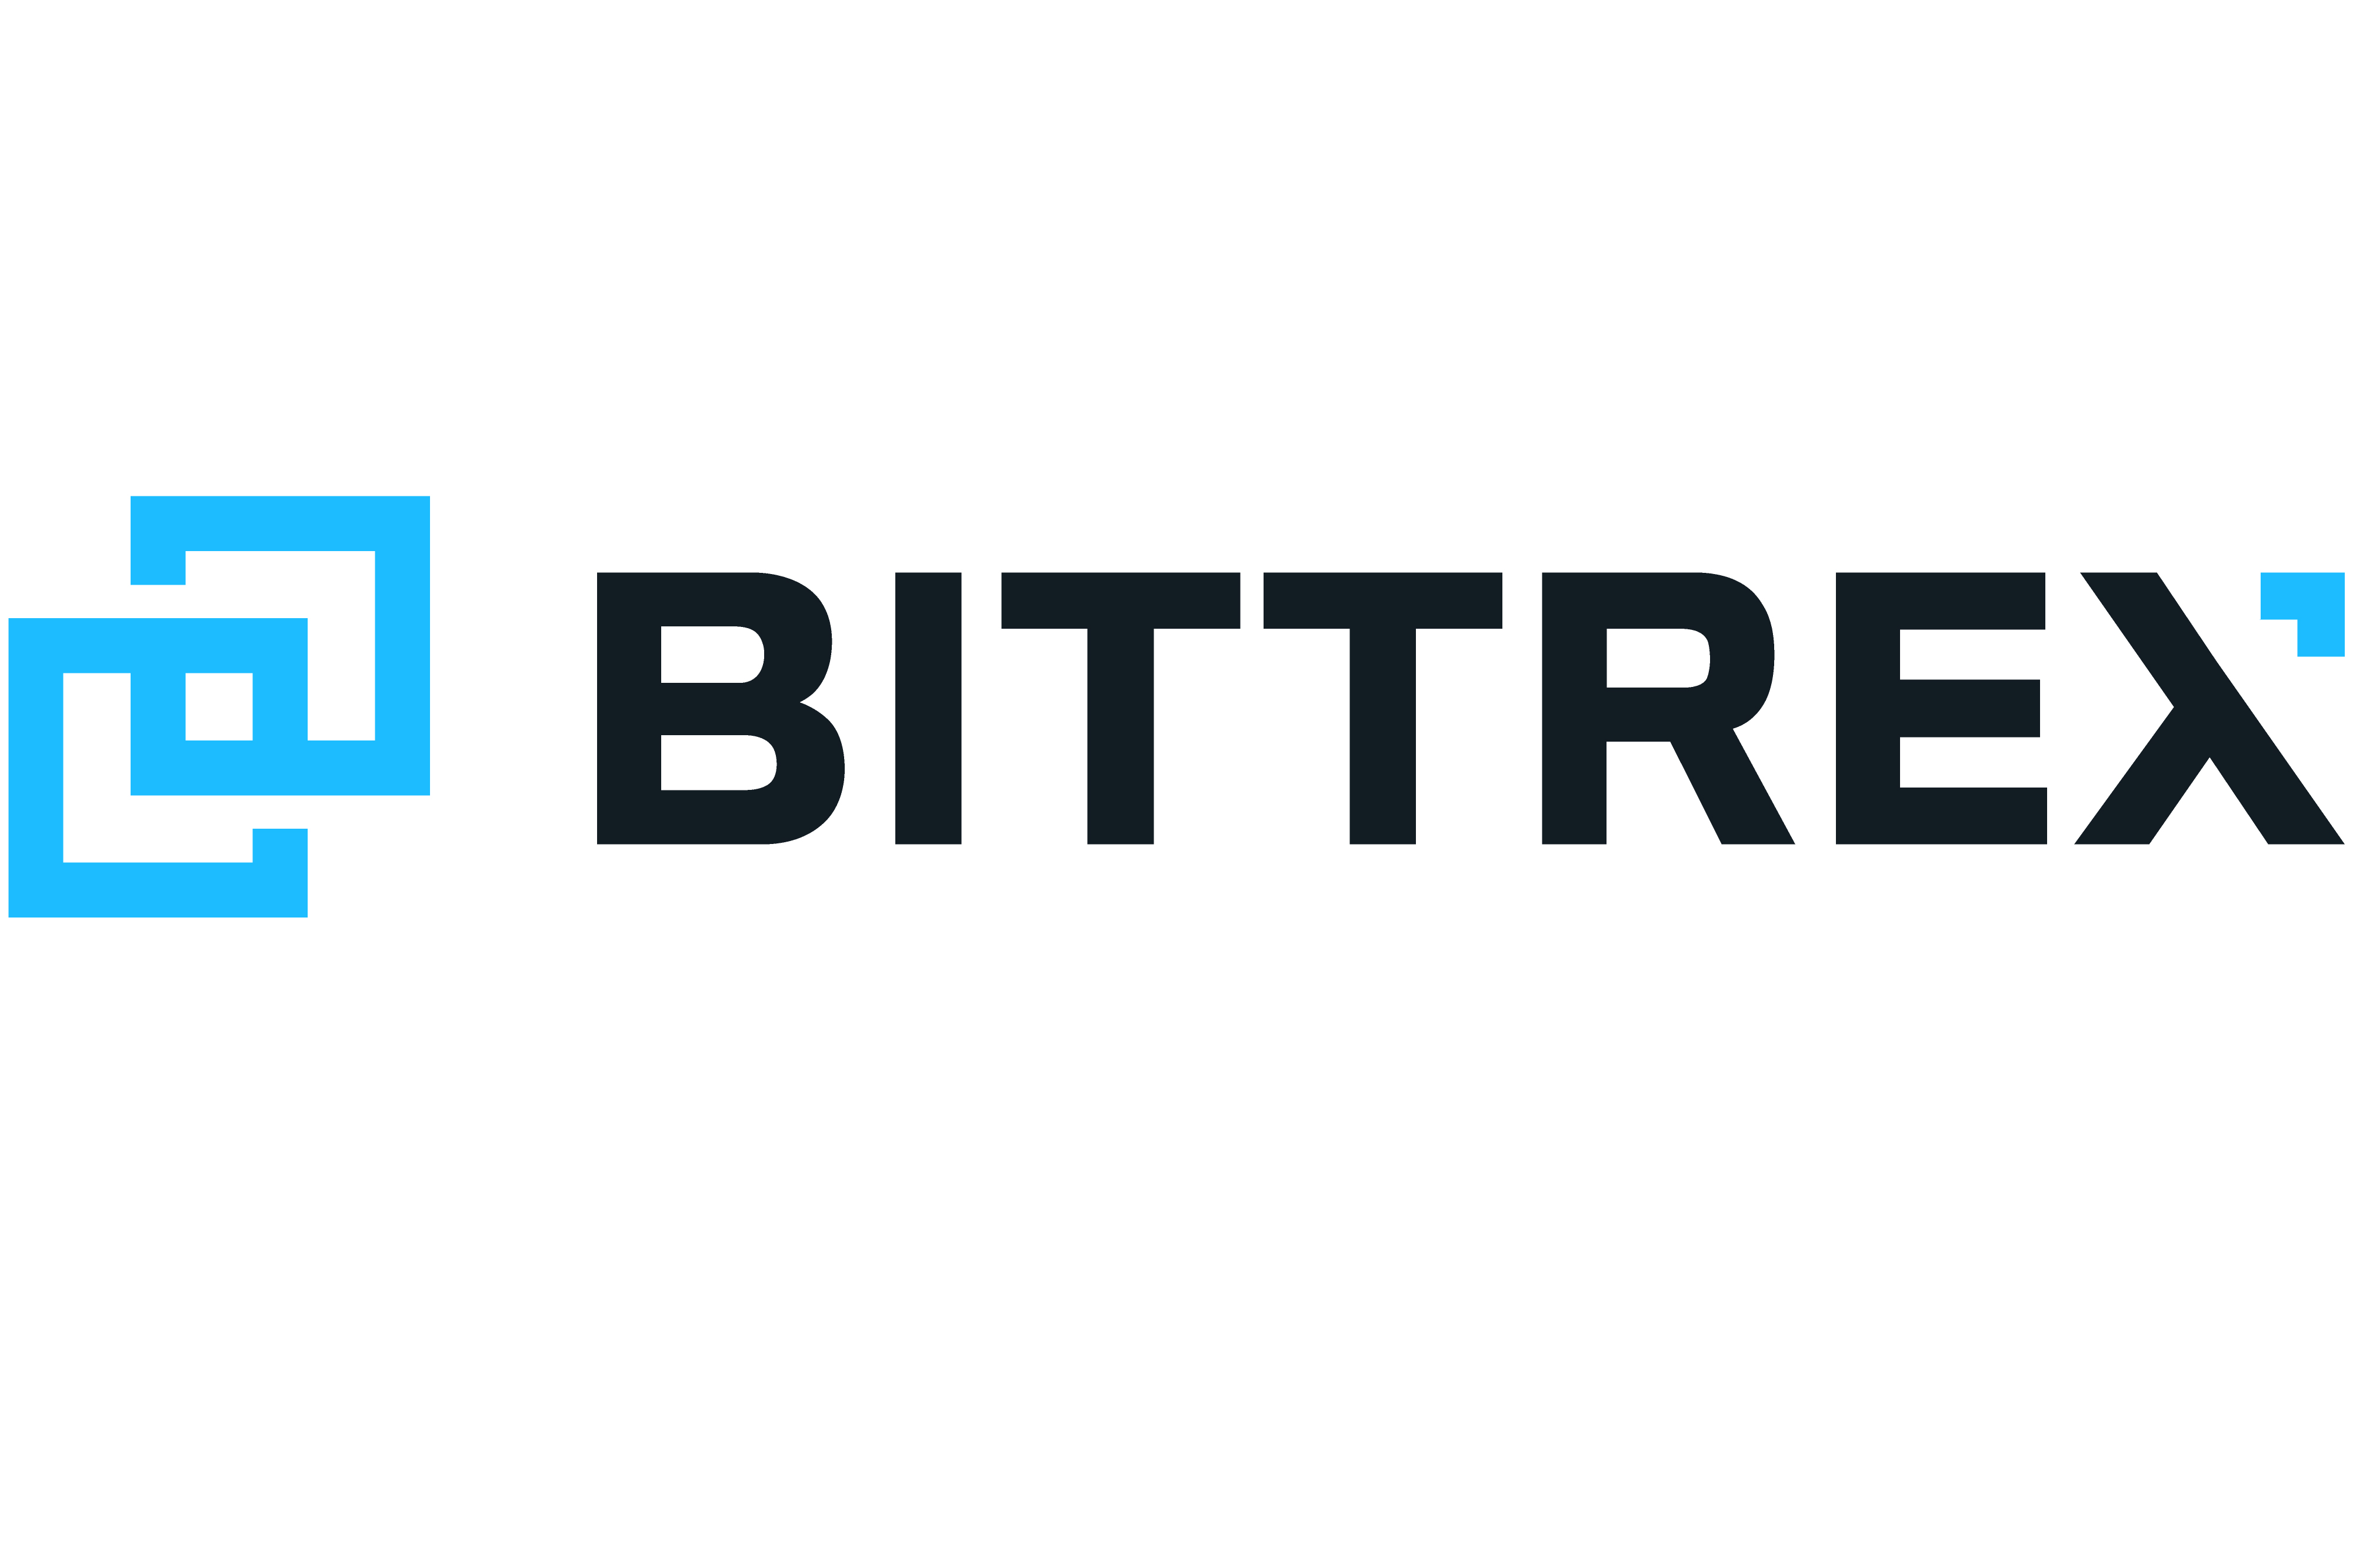 Bittrex - News, Articles & Research - Finextra